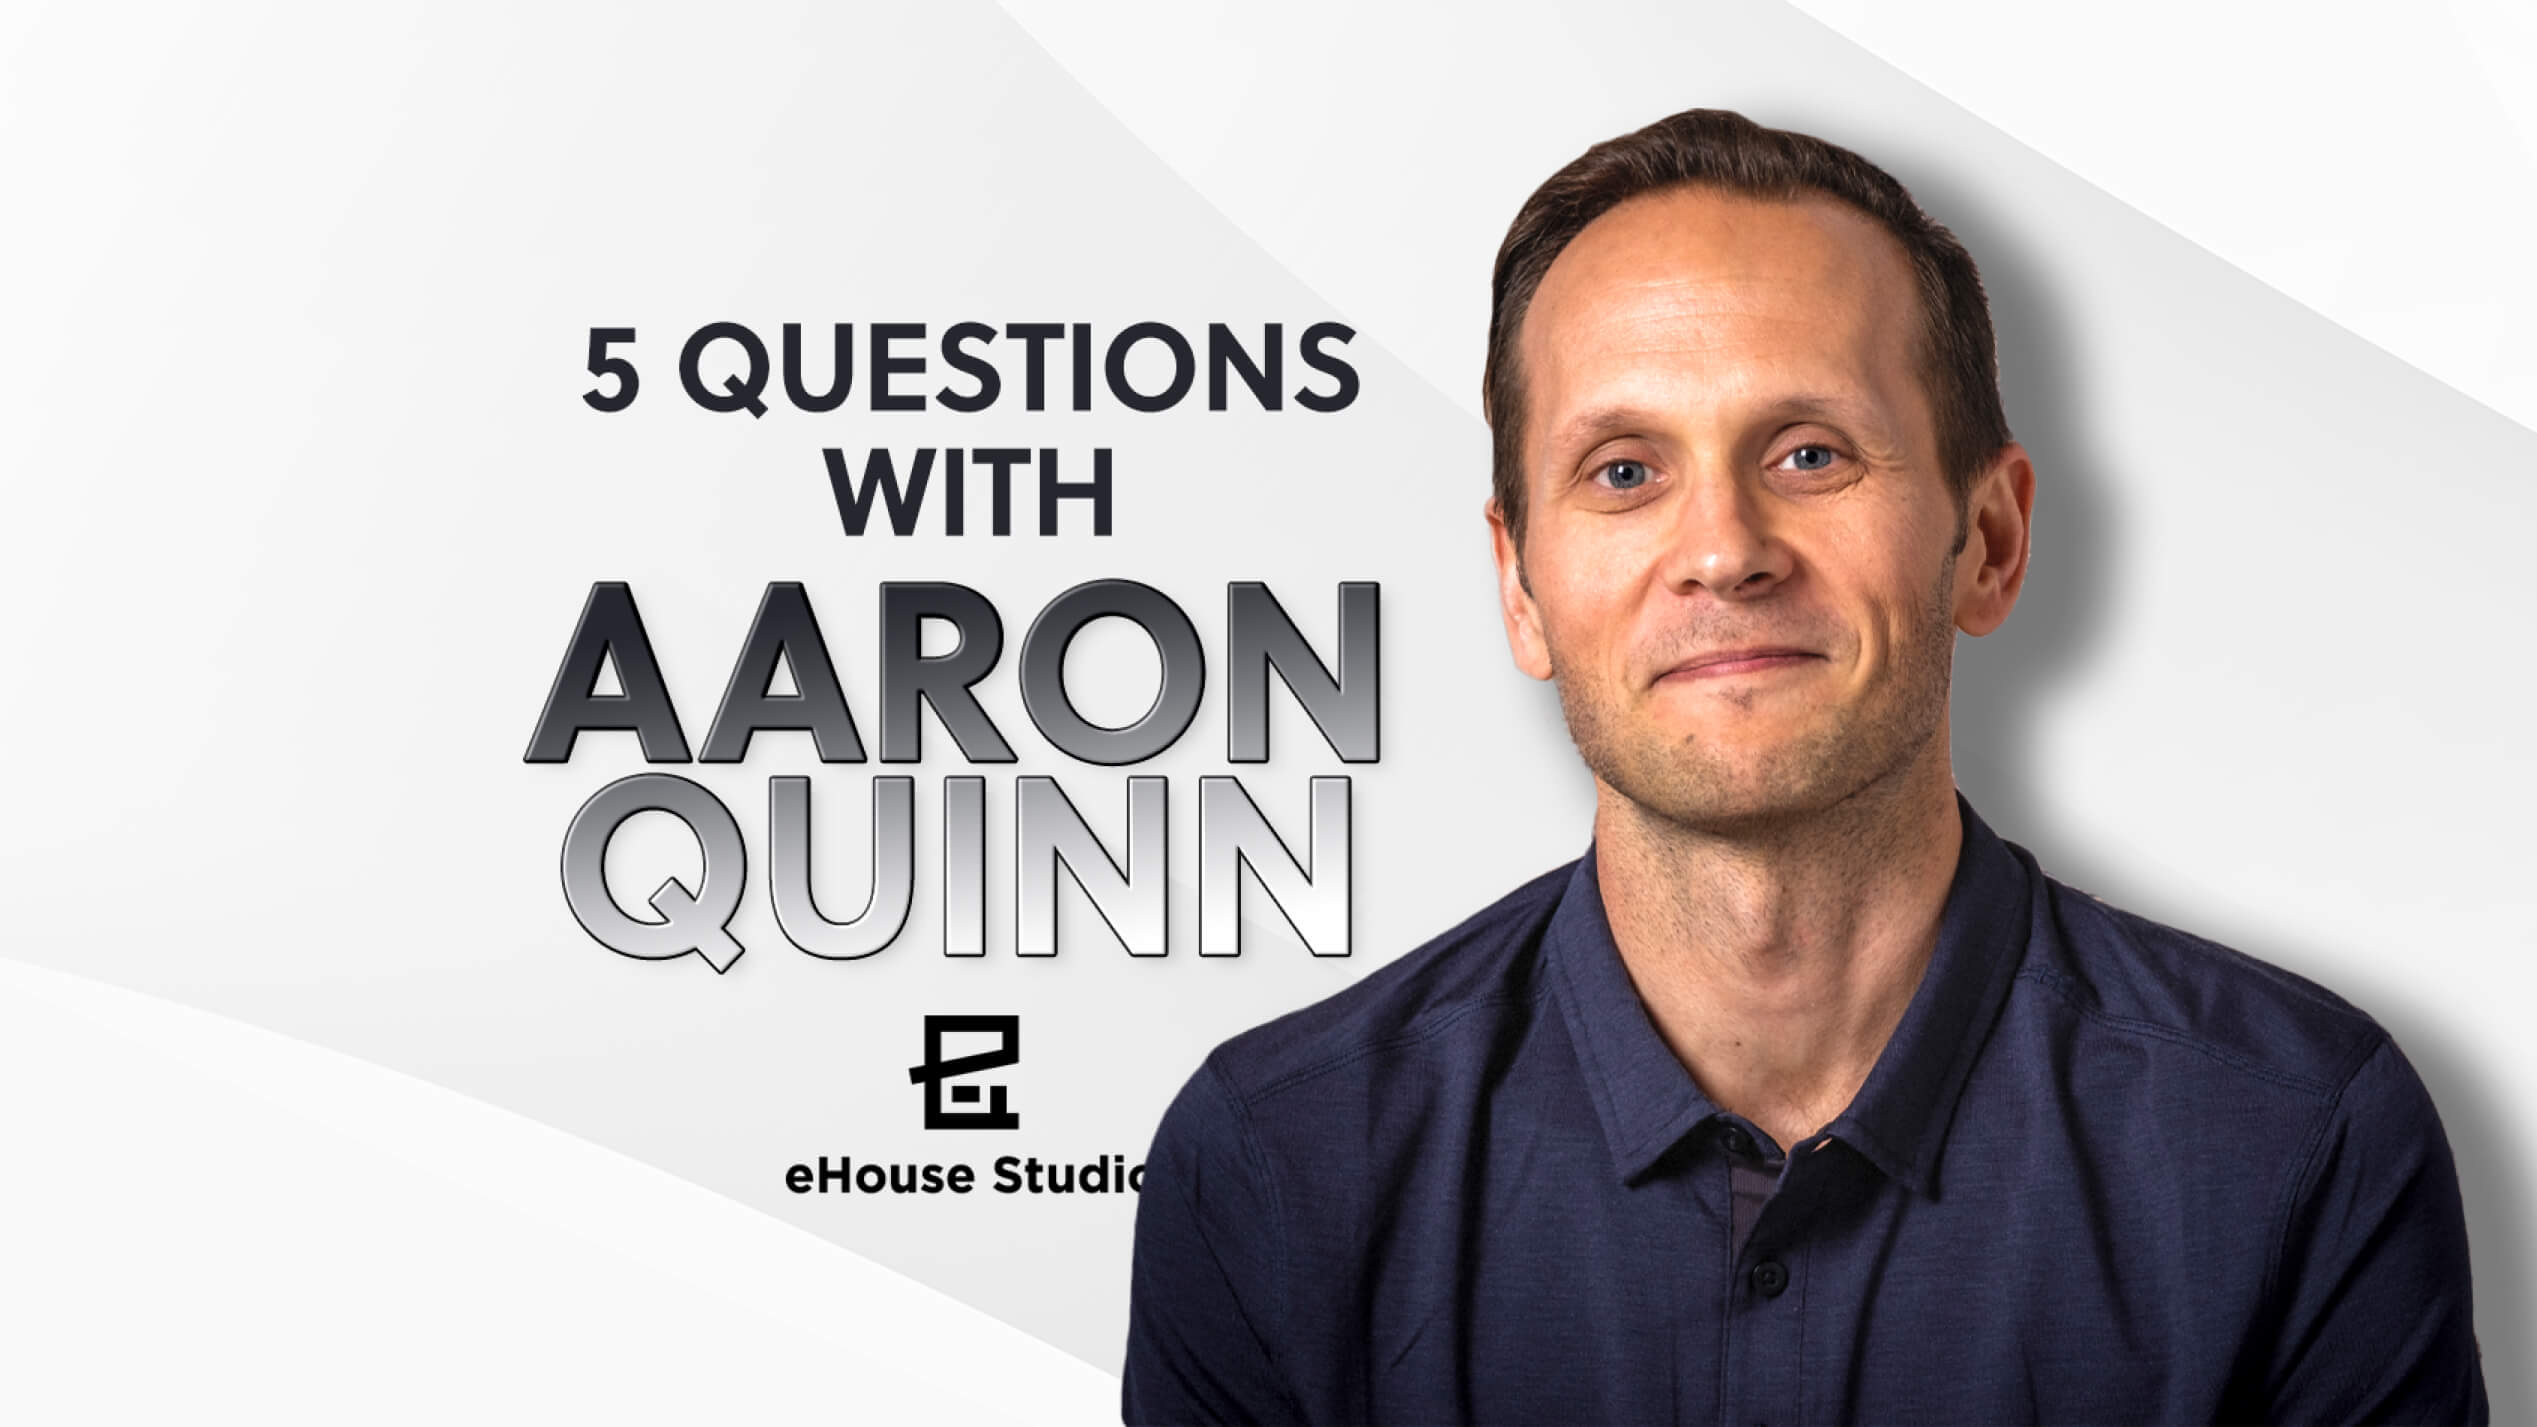 5 Questions with co-founder of eHouse Studio, Aaron Quinn